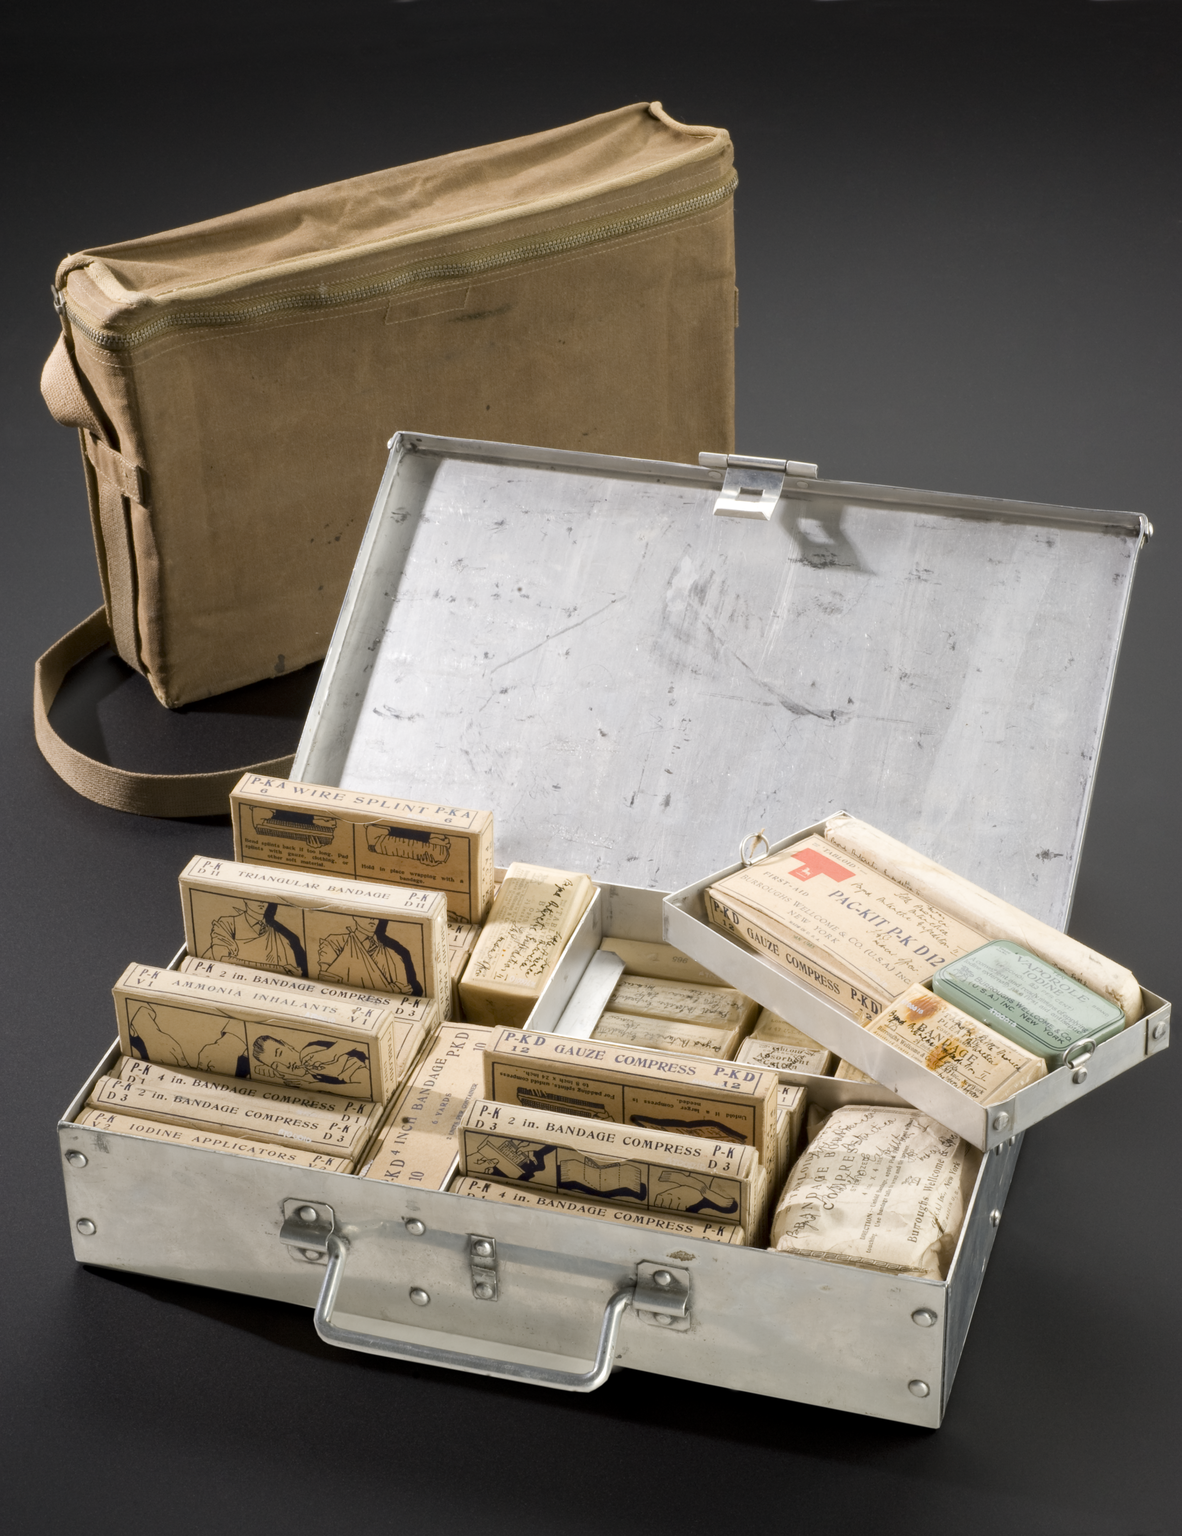 First aid kit used by Rear-Admiral R.E. Byrd on his Antarctic expedition in 1928-1930